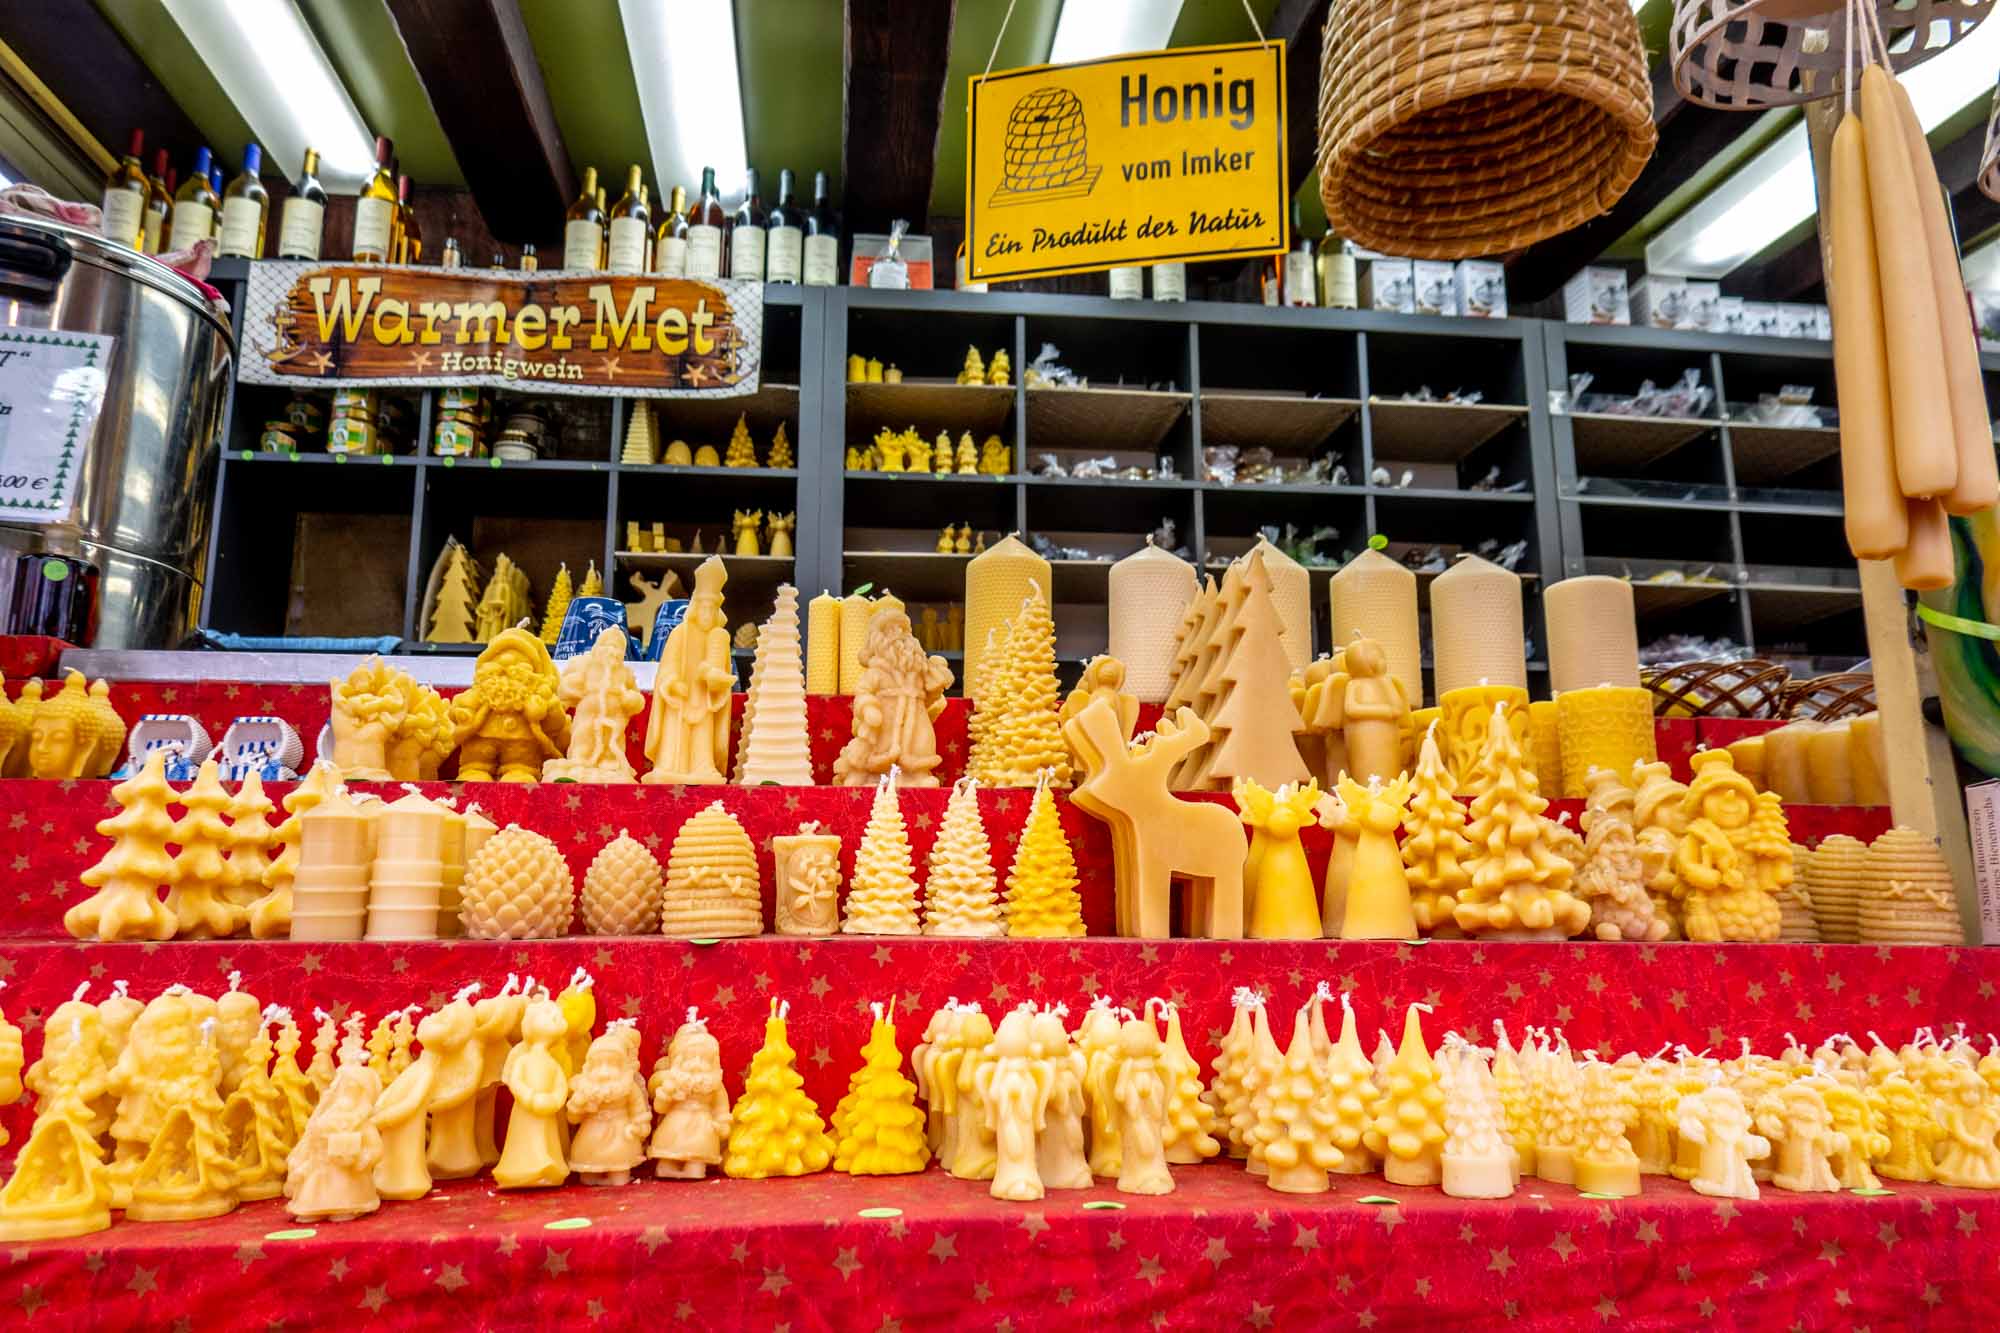 Rows of beeswax candles displayed for sale at a market